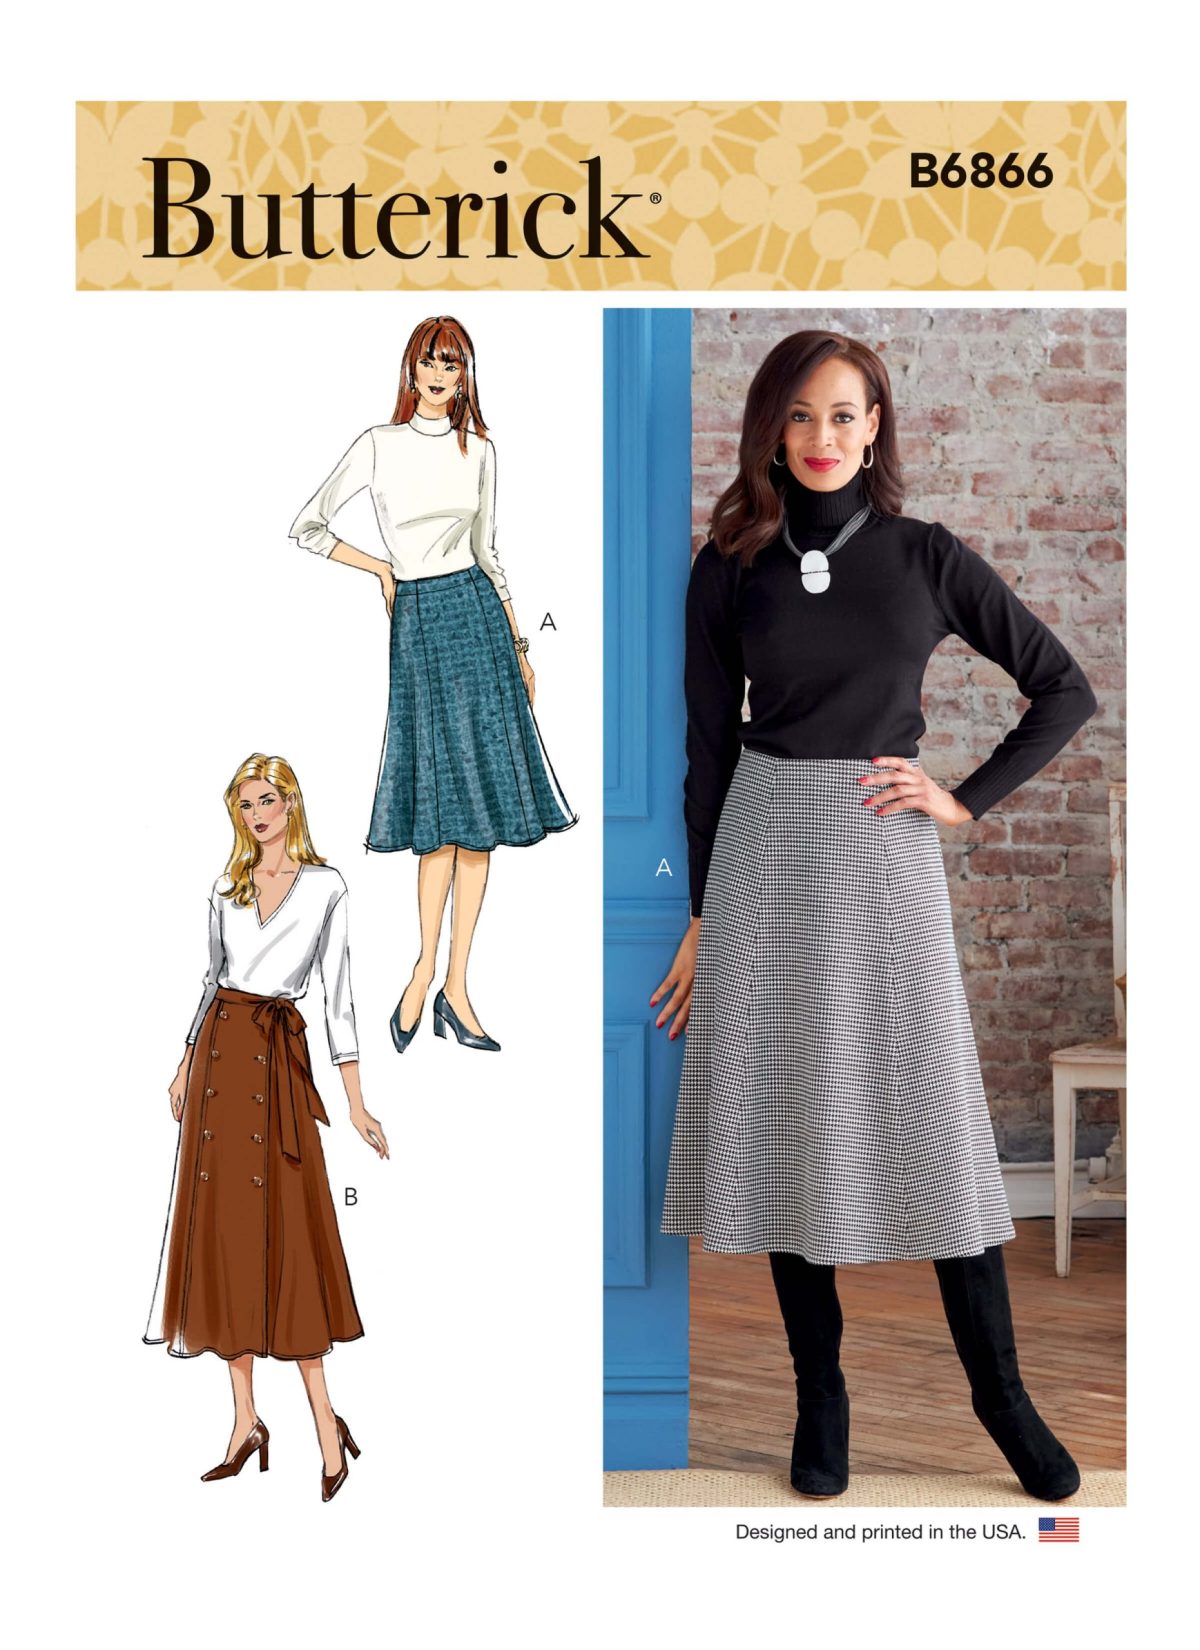 Butterick Sewing Pattern B6866 Misses' Skirt and Sash